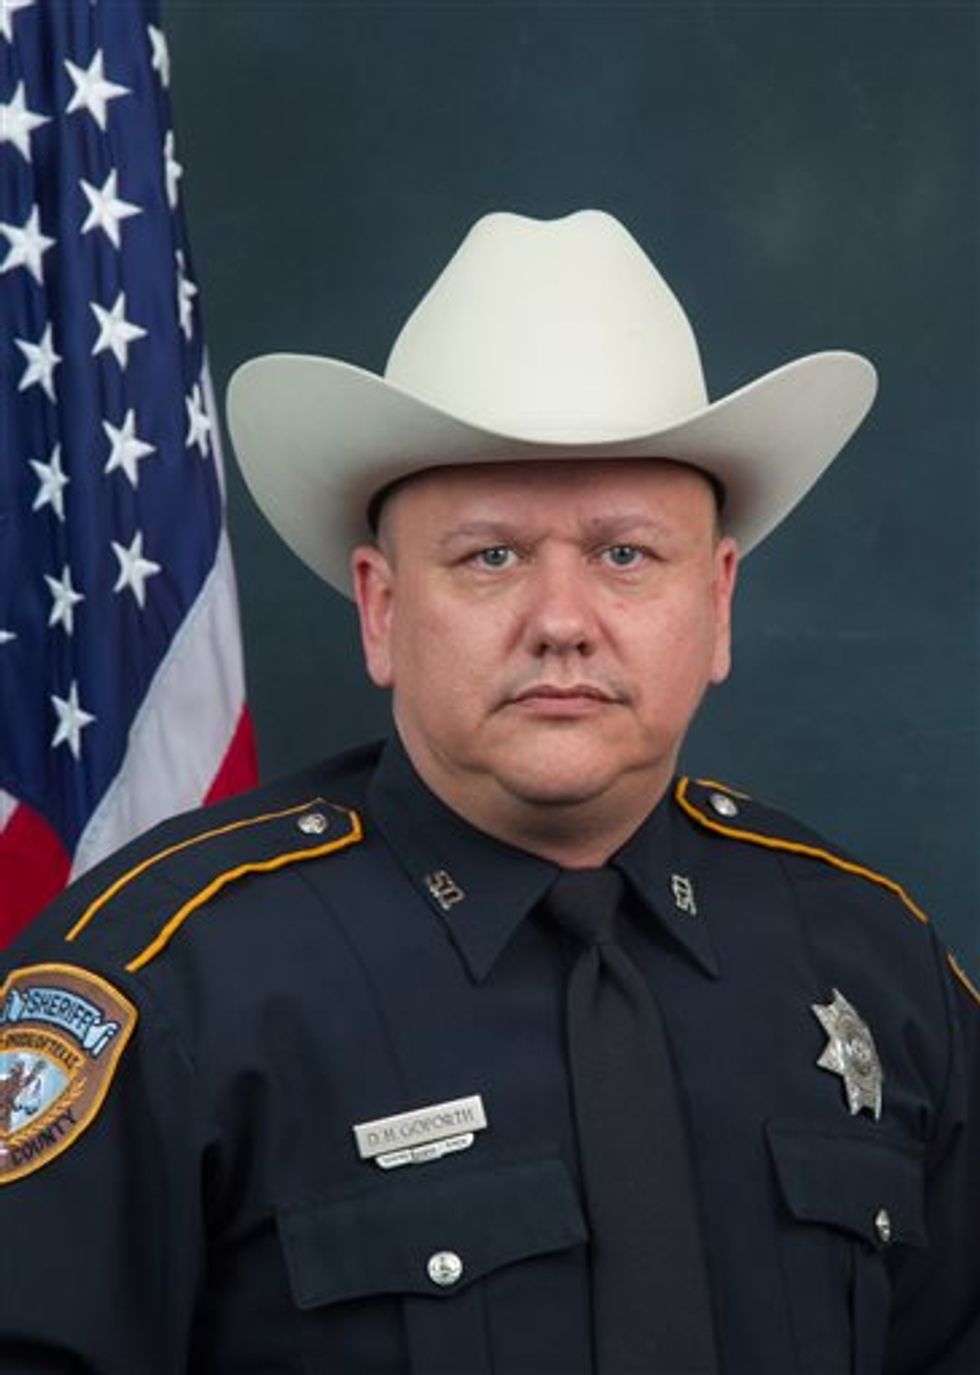 Slain Texas Deputy Ambushed at Gas Stataion Was Shot 15 Times, District Attorney Says